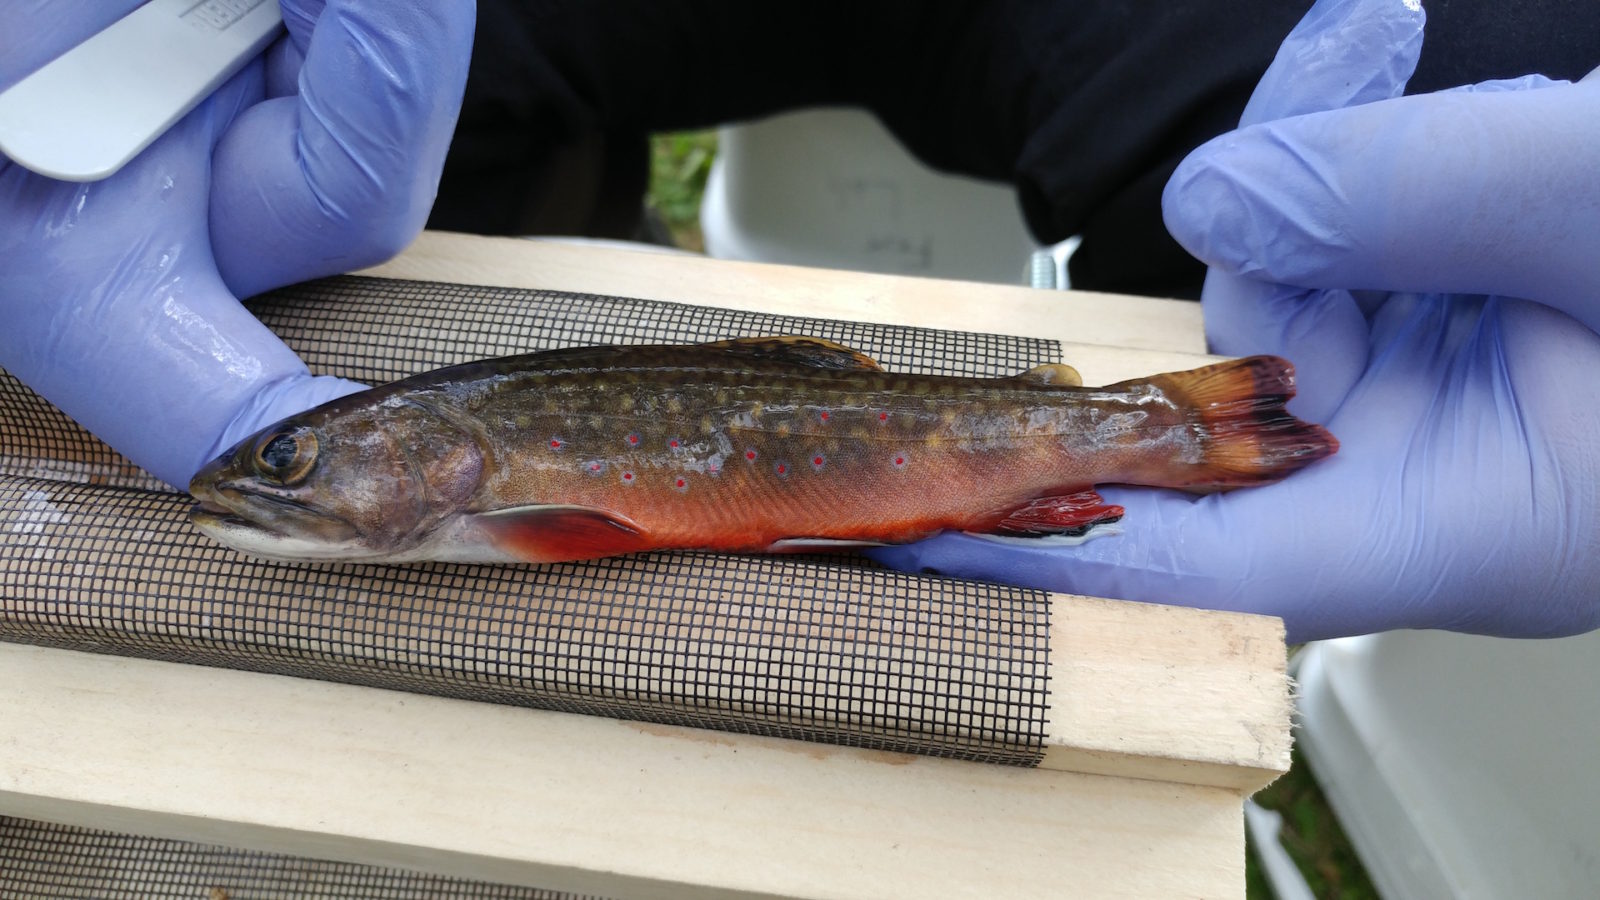 A brook trout close to spawning season. The belly is red, and the fins are red, edged in black and white with white being the outermost colour.